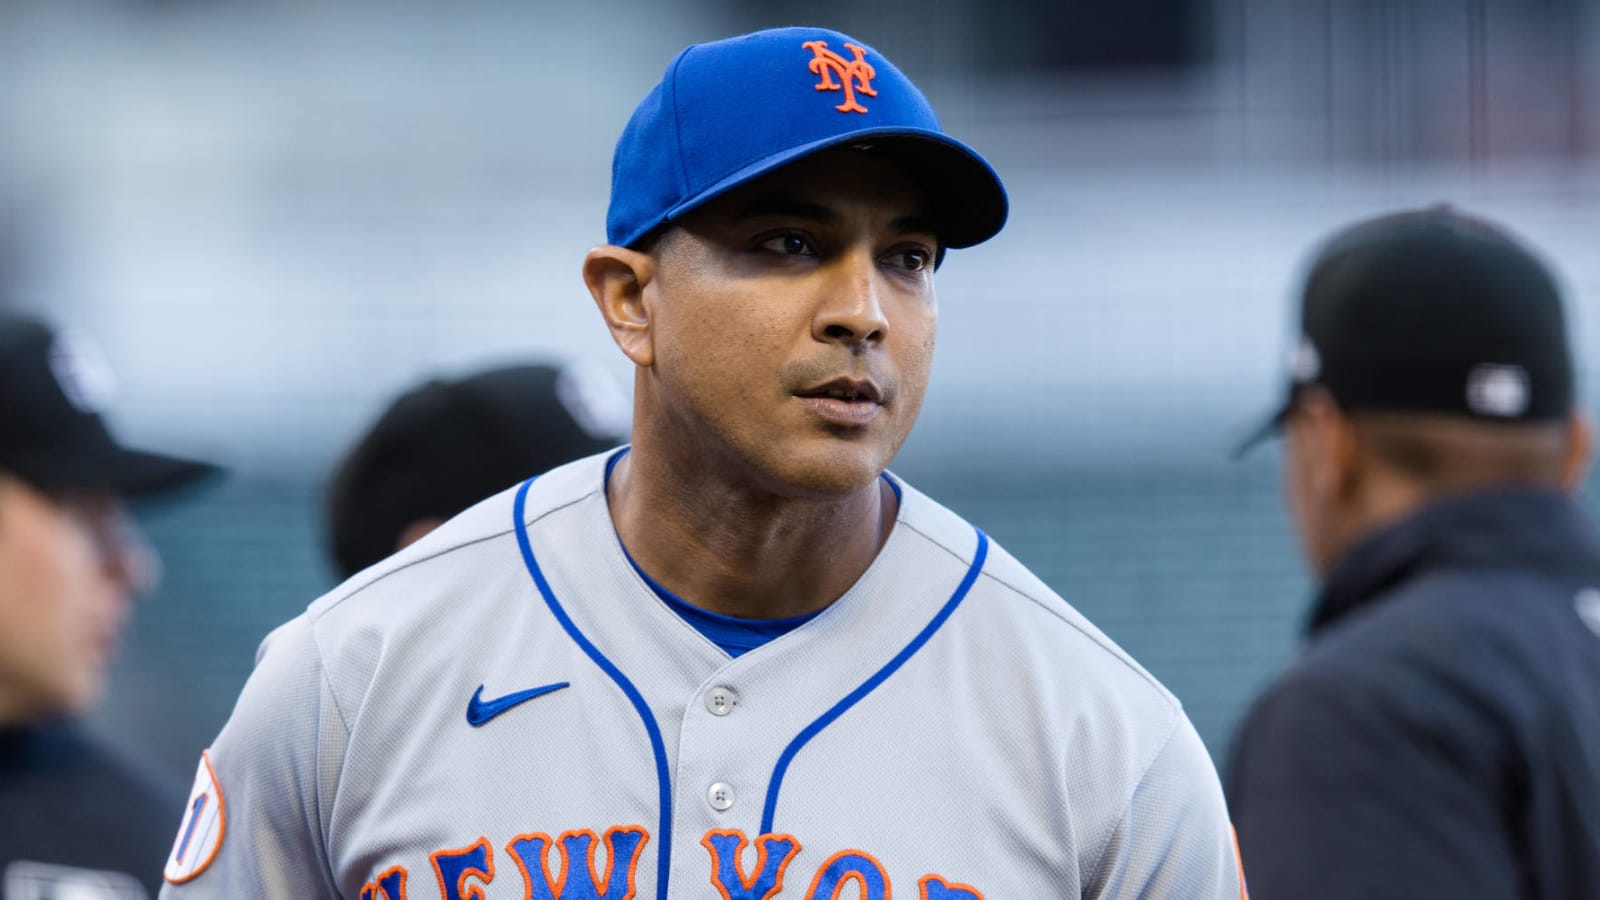 Mets' Rojas on owner's criticism: 'We all gotta be held accountable'